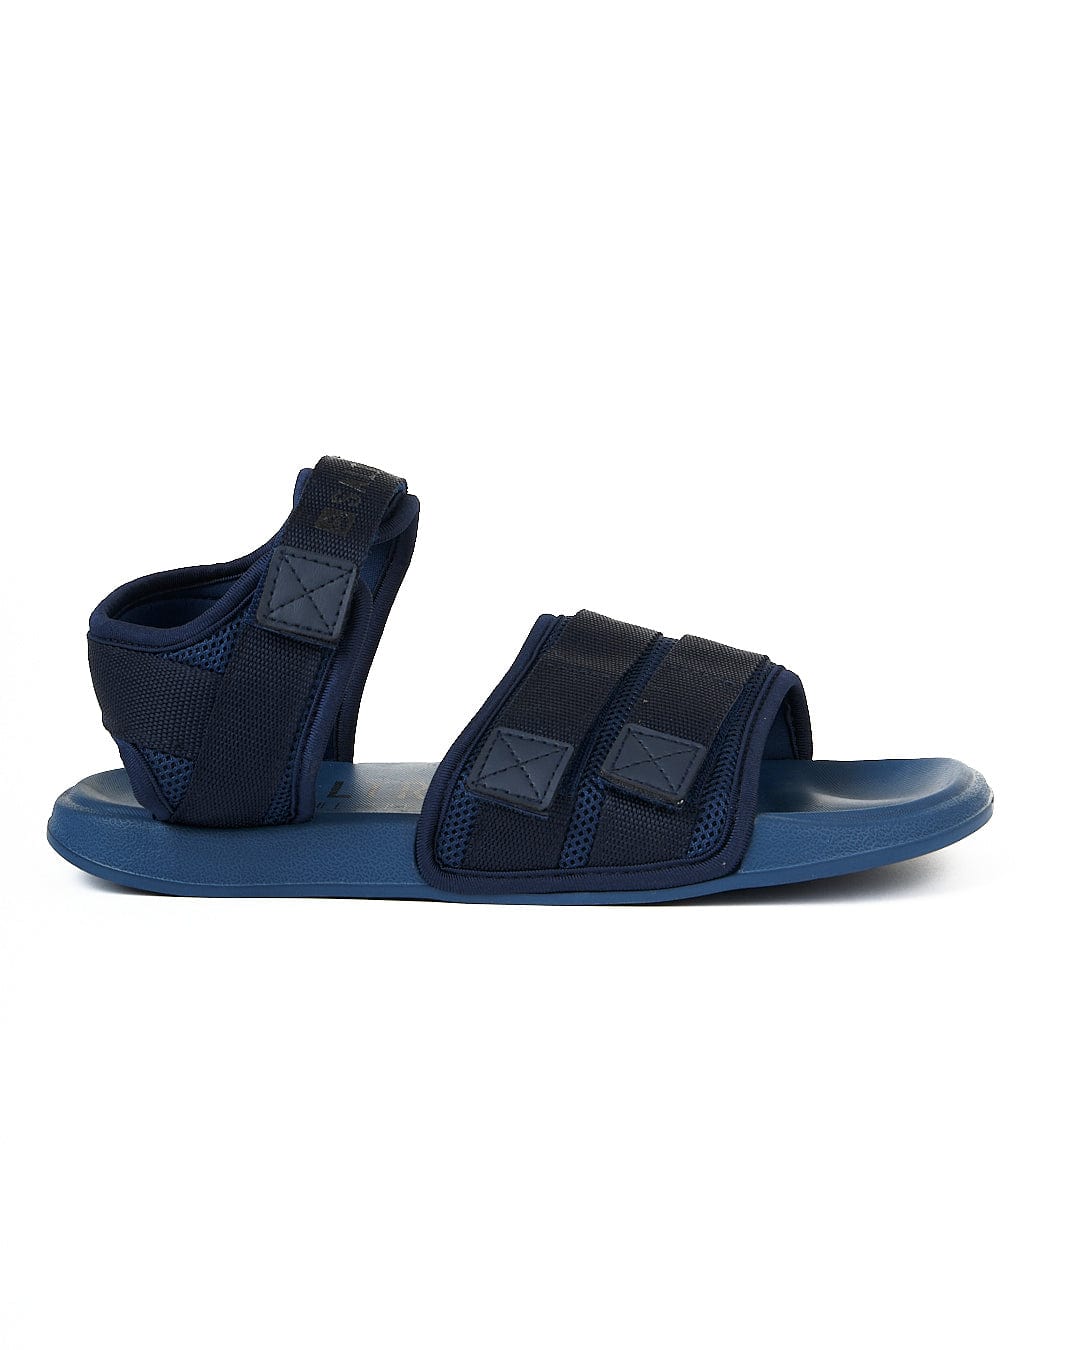 The Saltrock men's navy sandals with two straps.